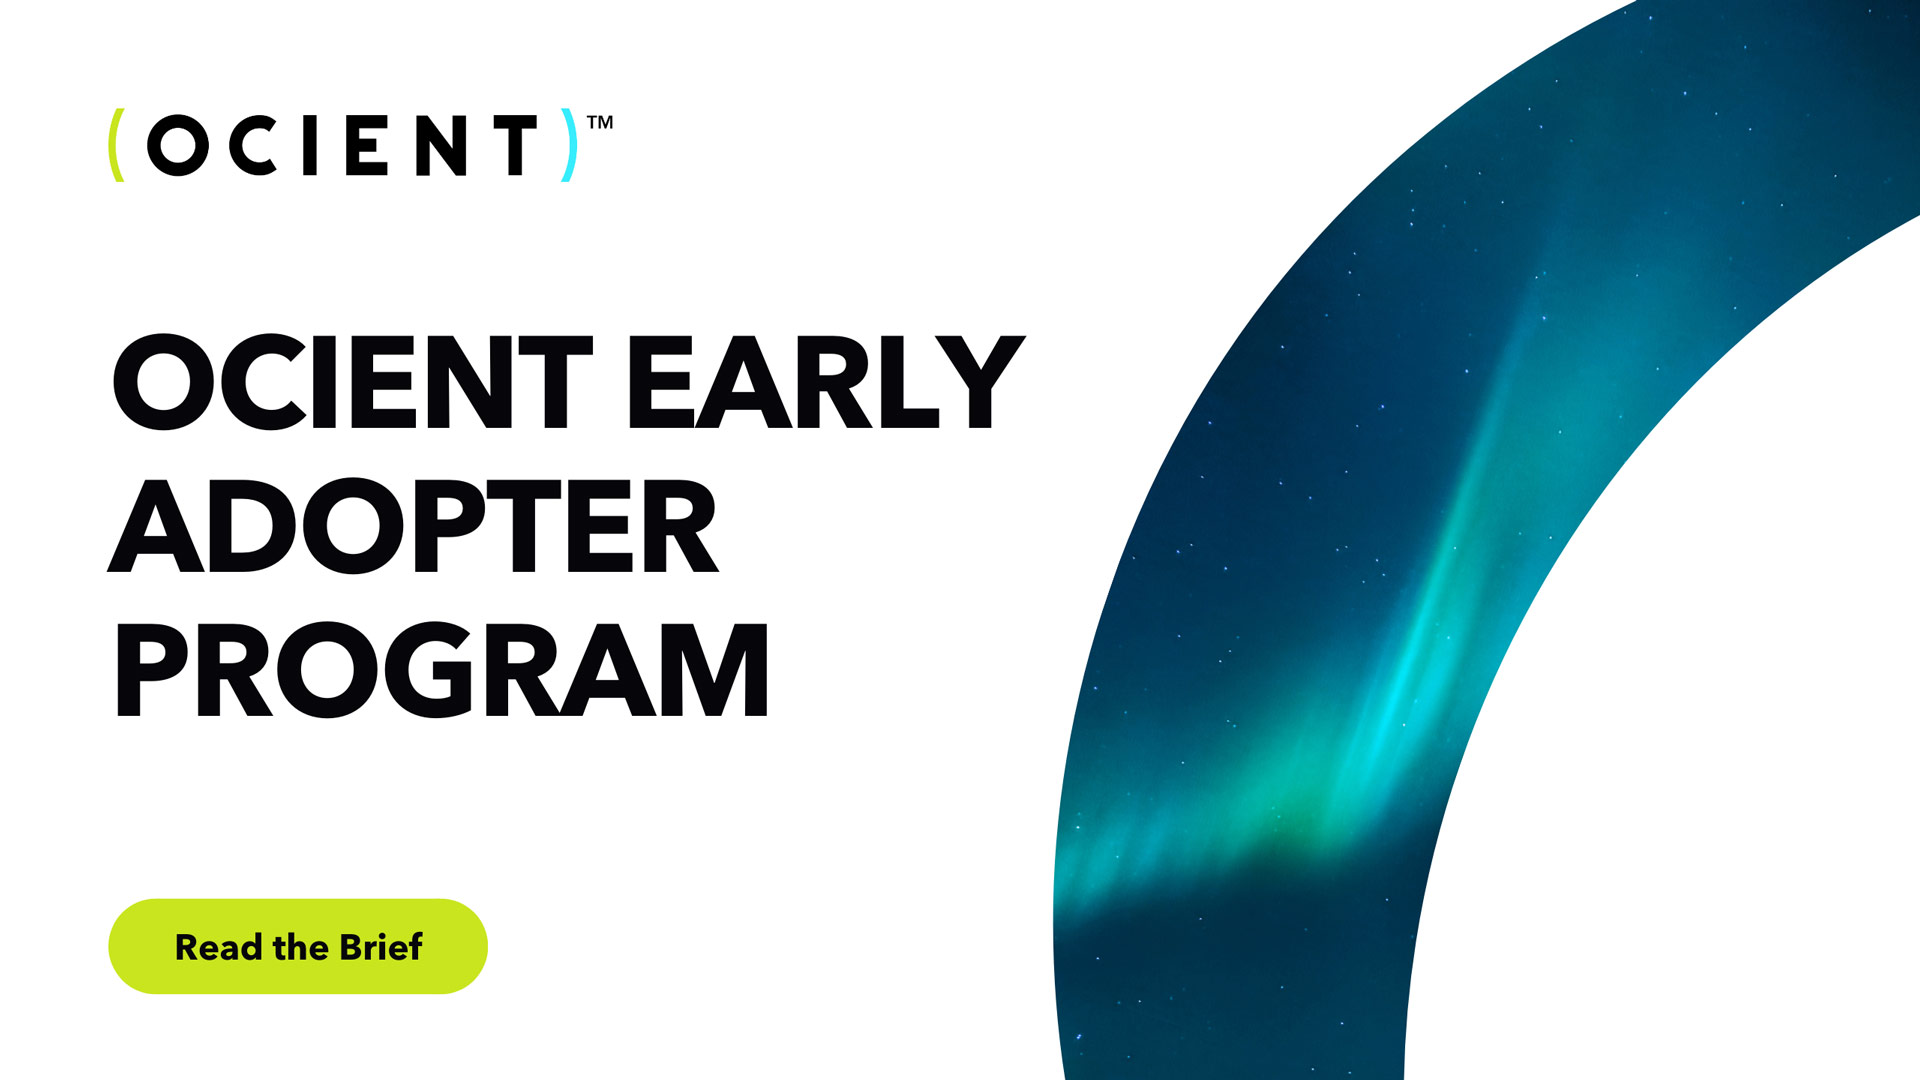 Ocient Early Adopter Program